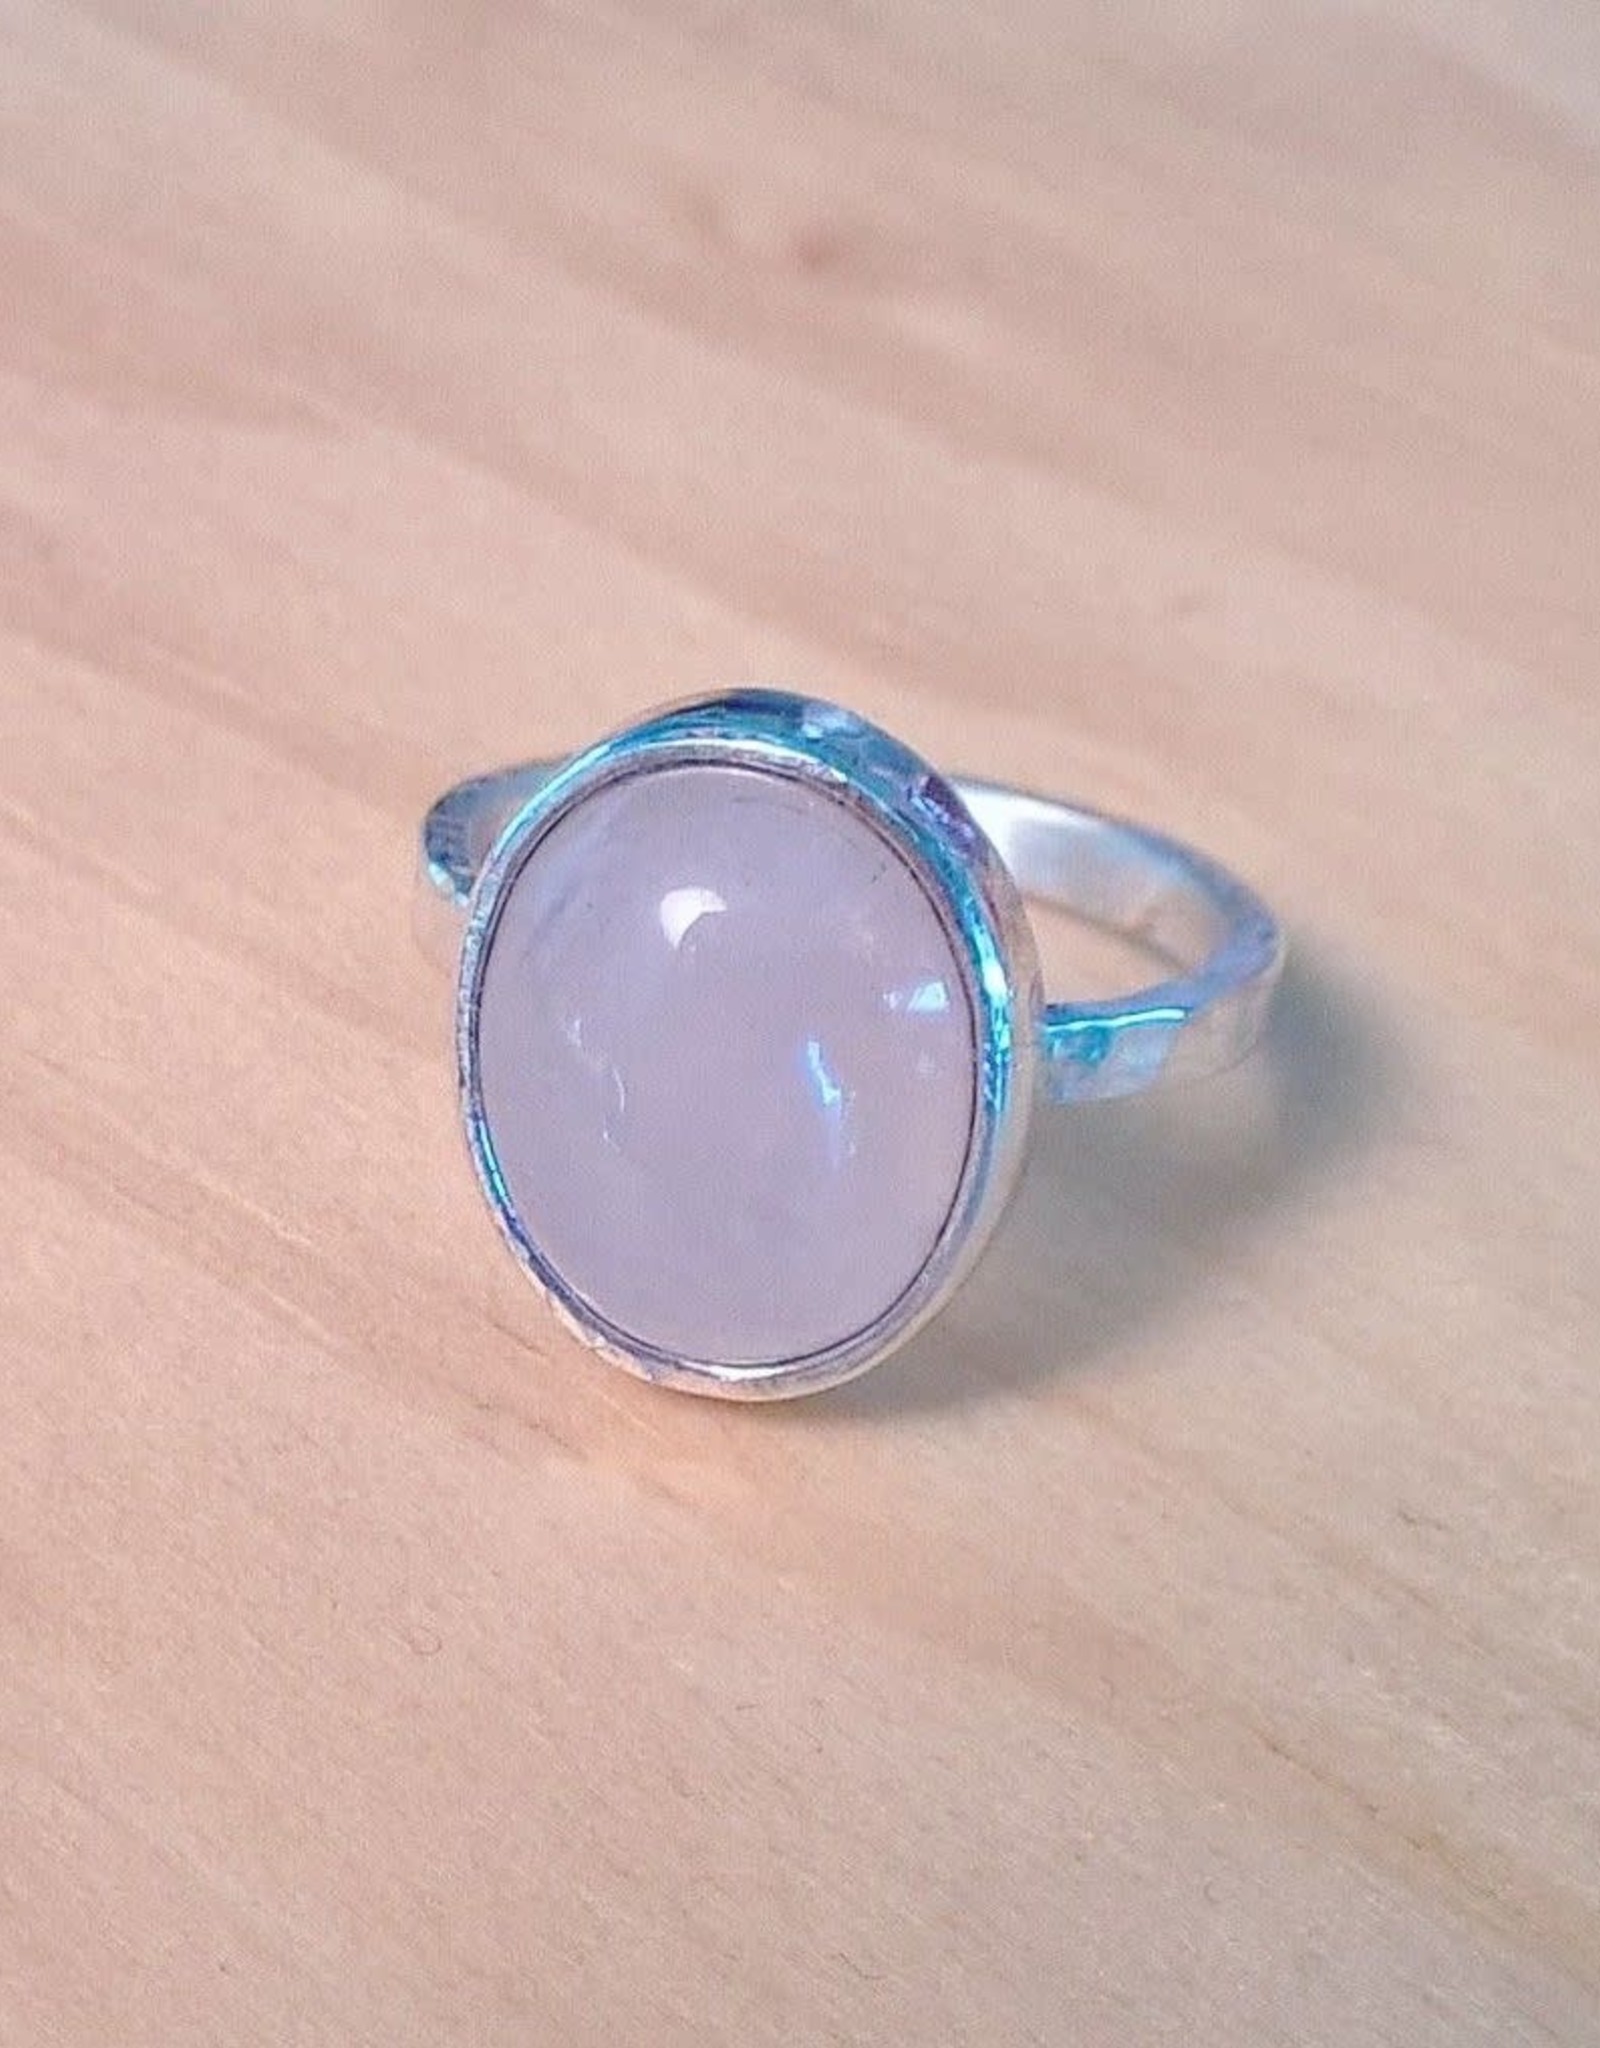 Devil May Wear Spring Blossom Ring. Rose Quartz in Solid Silver setting and band. Size 4